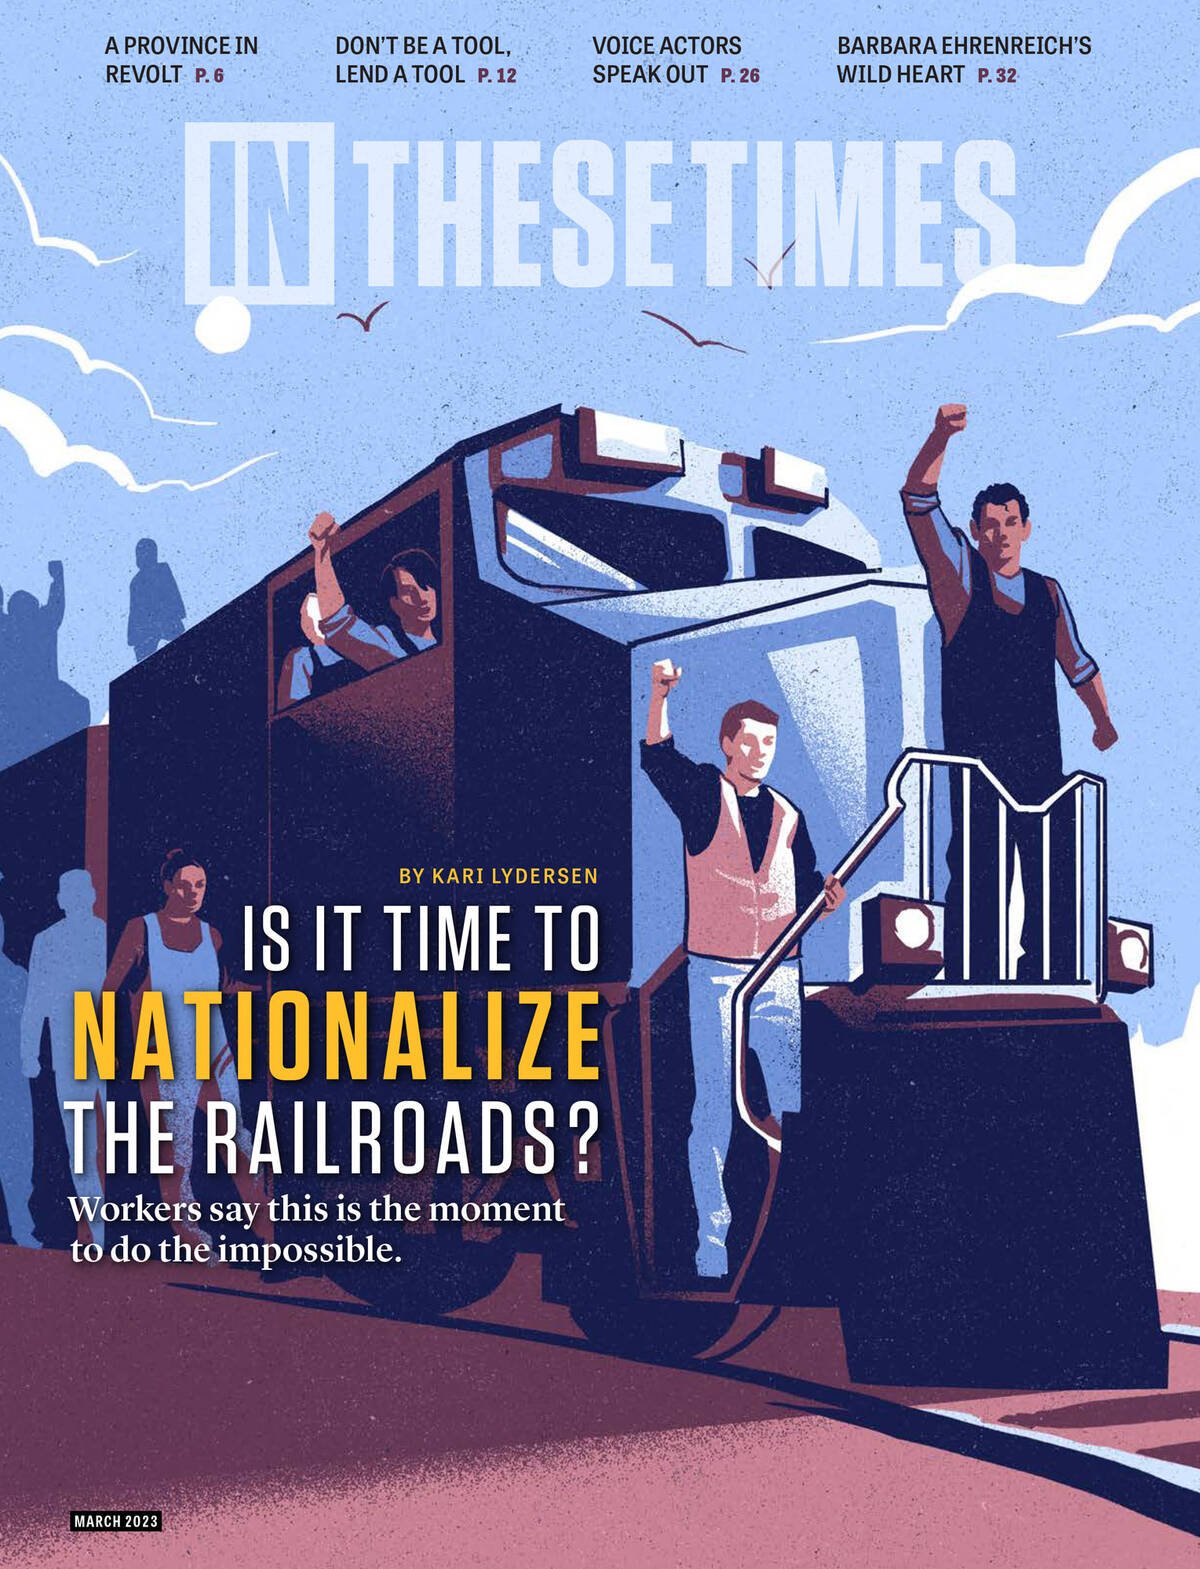 Why Railroad Workers United wants US rail infrastructure publicly